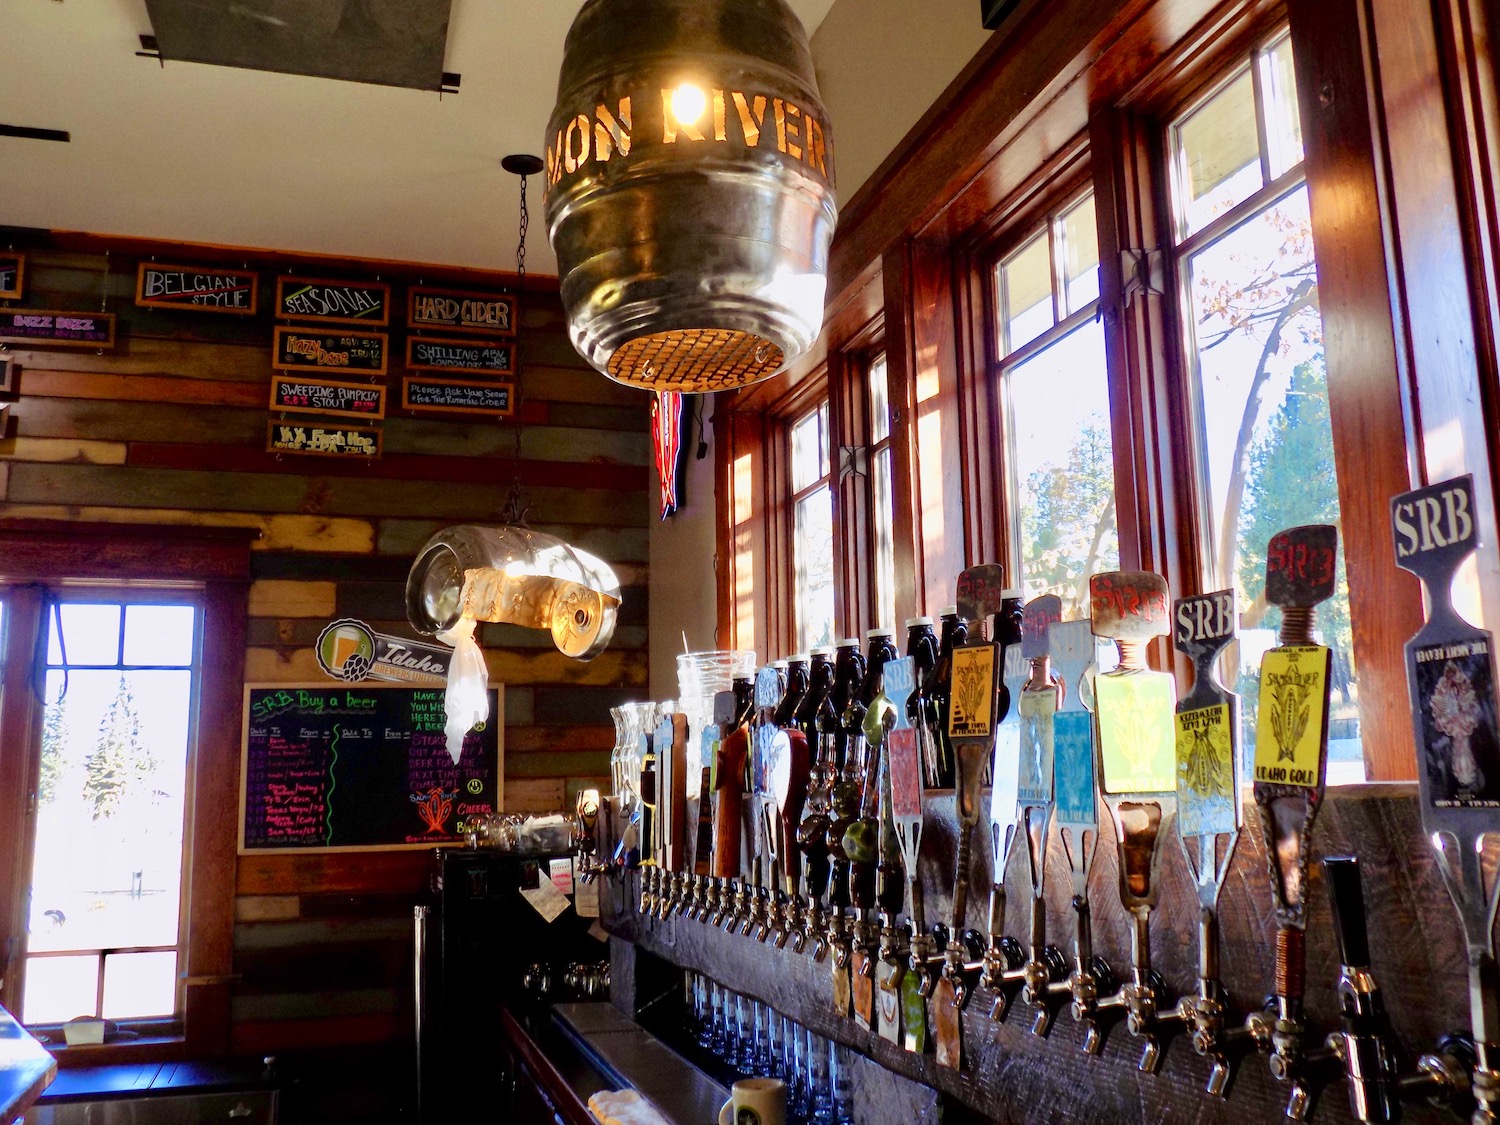 Salmon River Brewery in McCall, Idaho celebrates the Salmon River with beer.